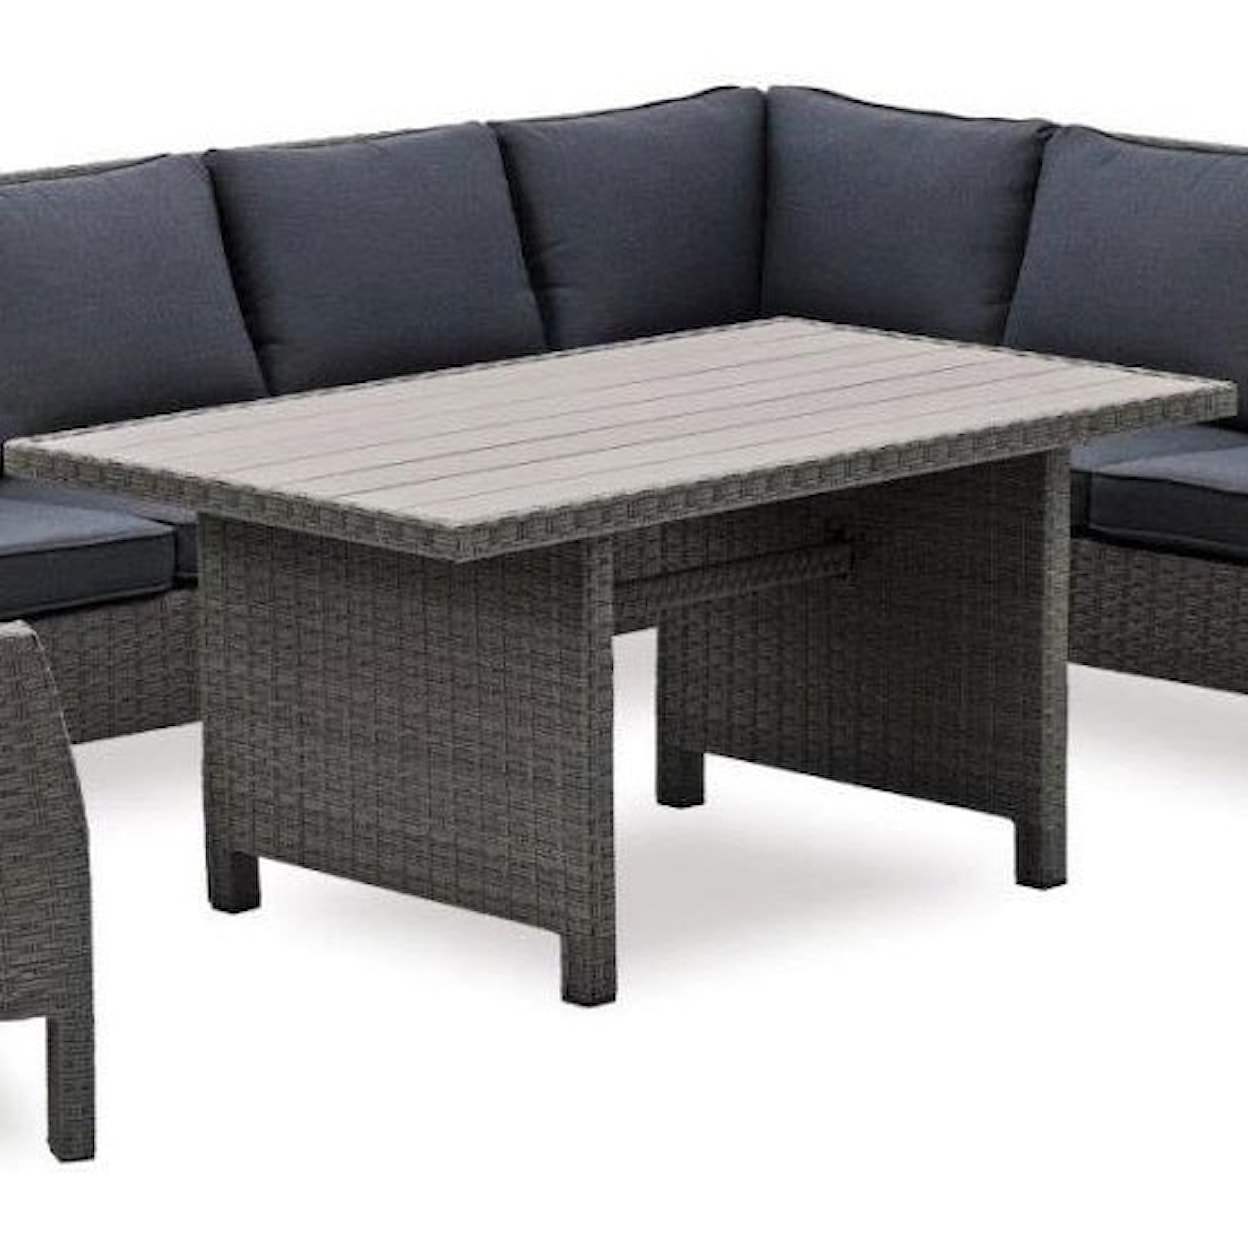 Primo International Arcadia Wicker and Aluminum Outdoor Dining Table